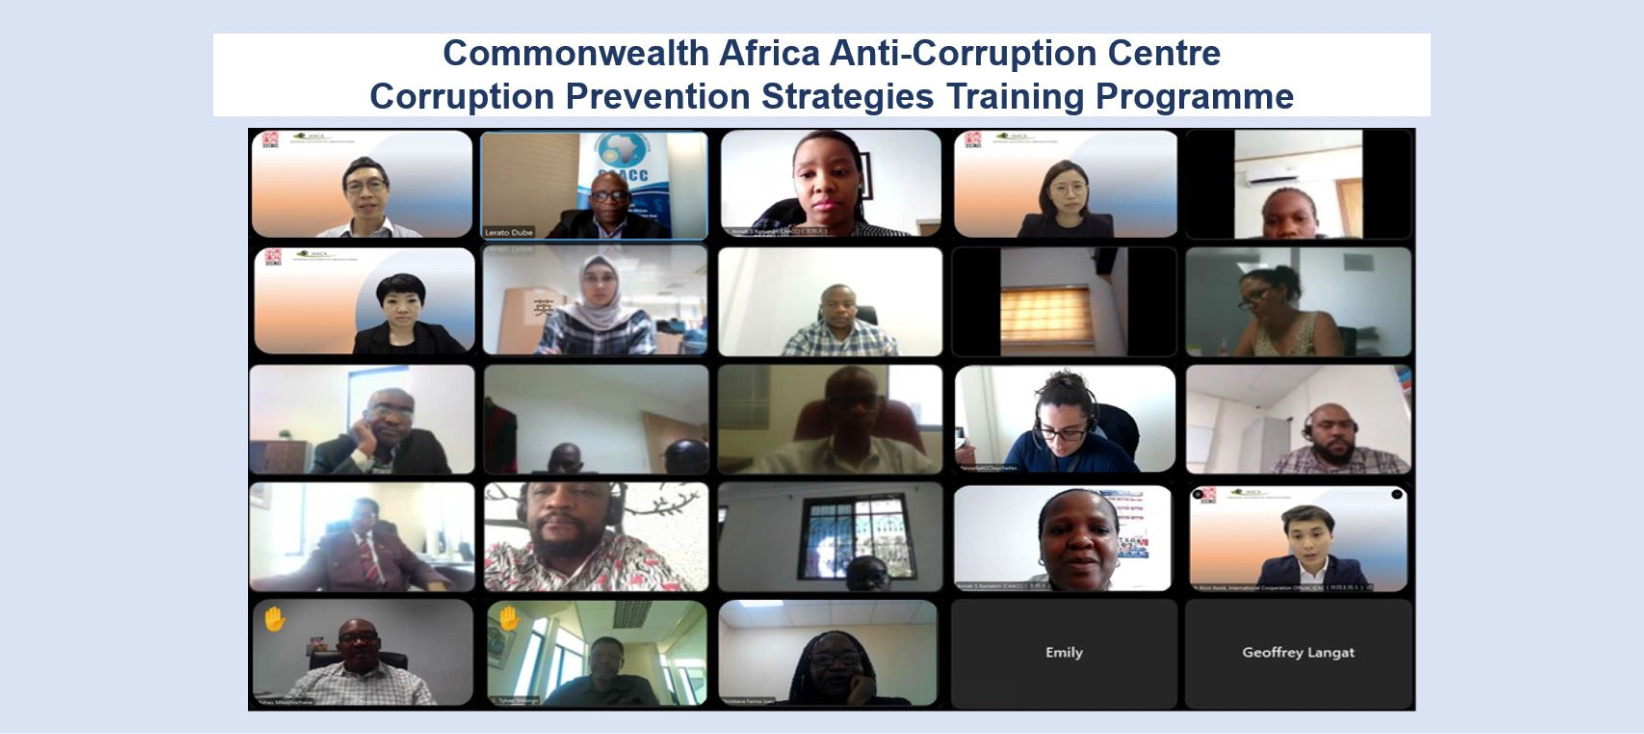 Participants from African anti-corruption authorities interacting with ICAC speakers